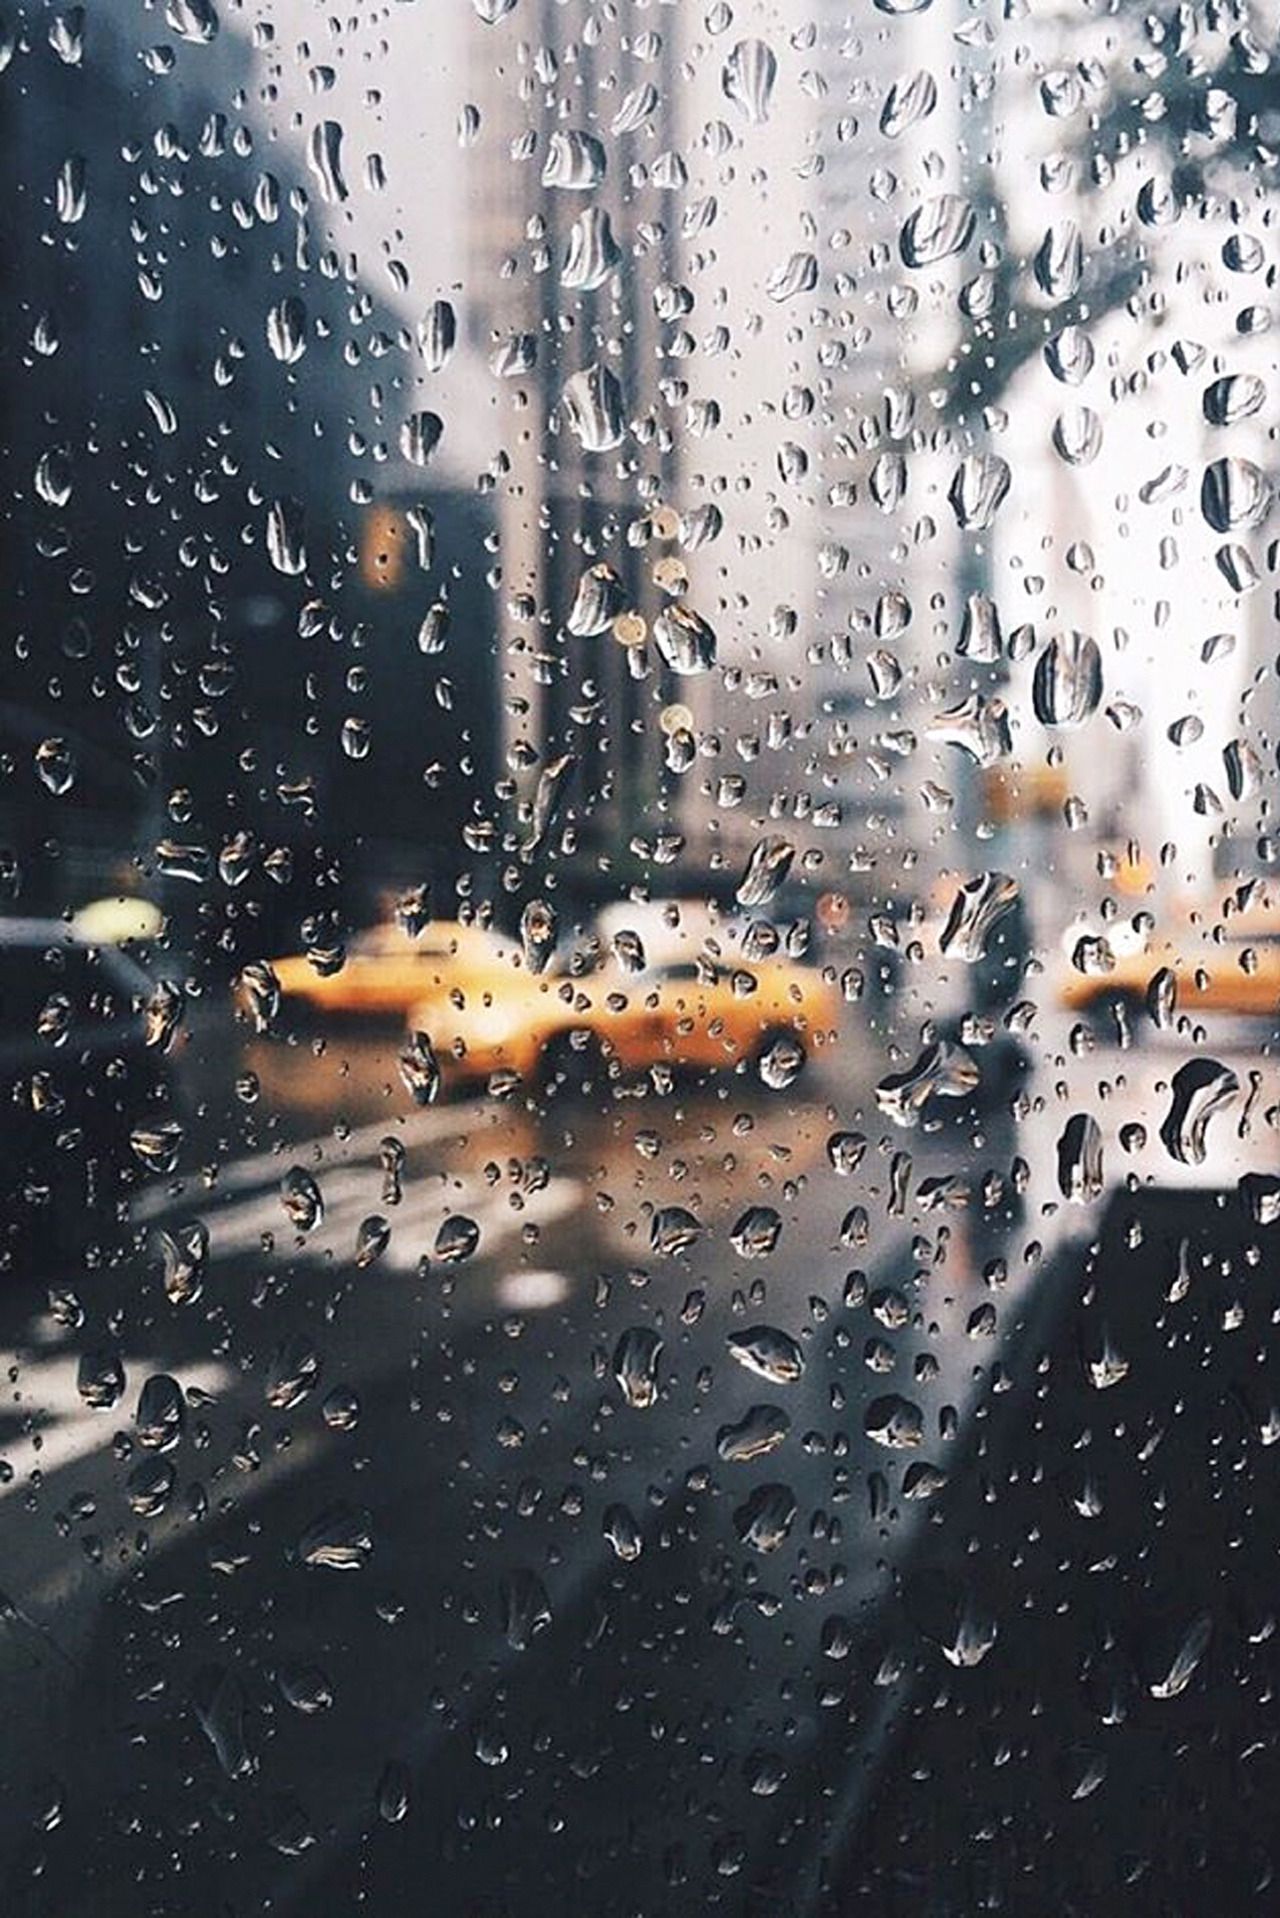 rainy day wallpapers for facebook